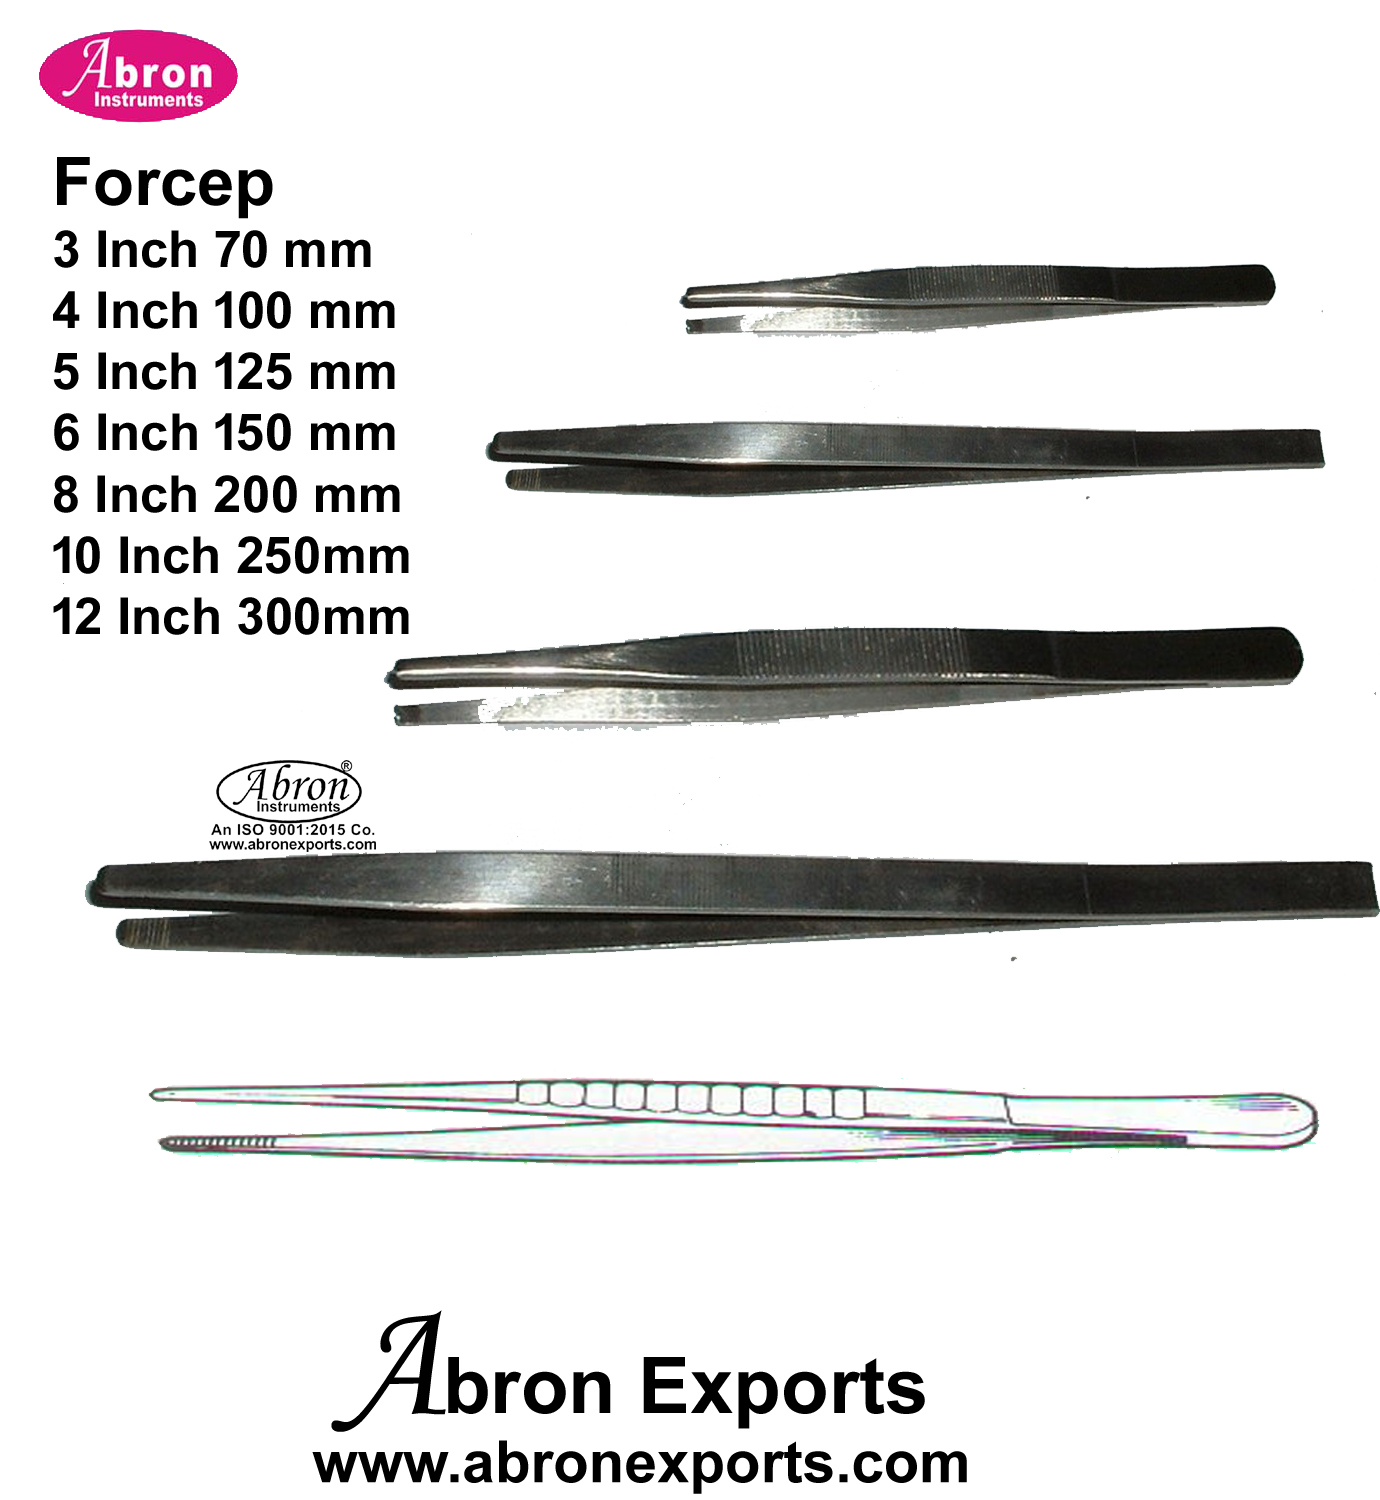 Surgical Forceps Blunt 5 inch 125mm 6 inch 150mm stainless steel abron pack of 10 ABM-2620B5